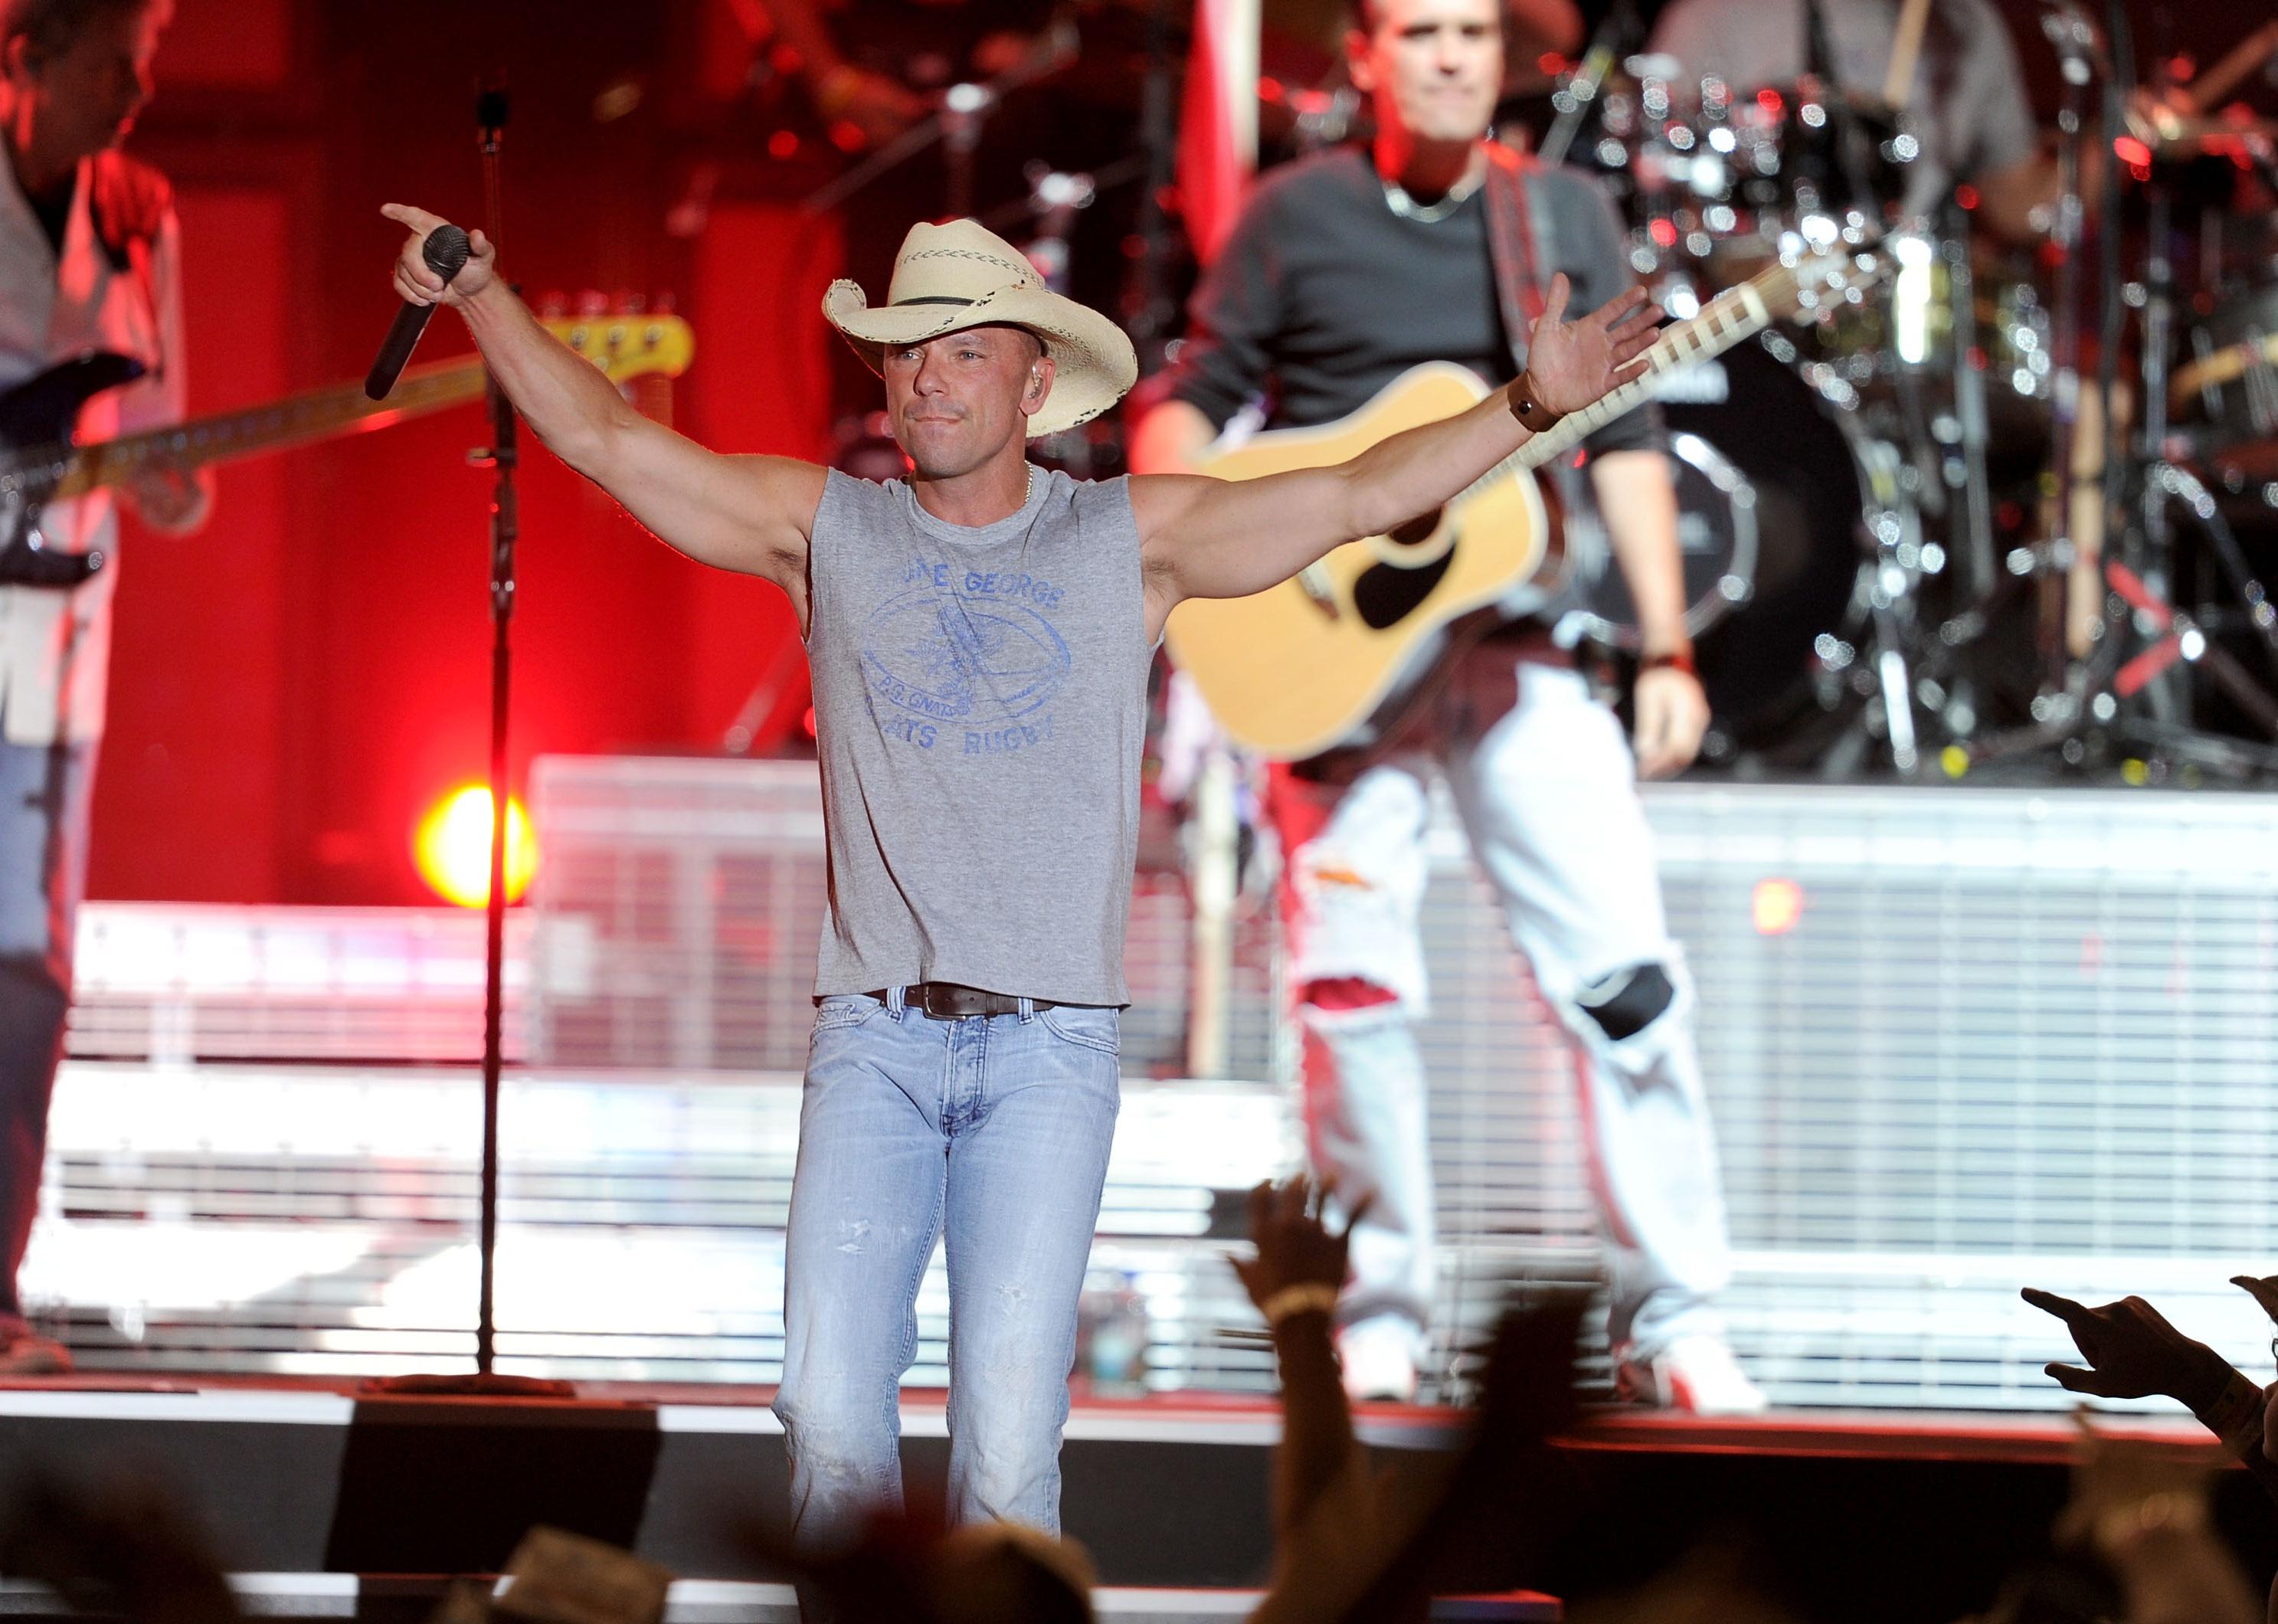 <p>Four-time winner of the Billboard Touring Award, country singer Kenny Chesney kicked off this concert tour in support of his studio album "Hemingway's Whiskey." It <a href="https://www.hollywoodreporter.com/gallery/top-tours-2011-u2-sade-272359/6-6-kenny-chesney/">sold out numerous shows</a> and became one of the year's highest-grossing acts. The Zac Brown Band co-headlined for select performances.</p>